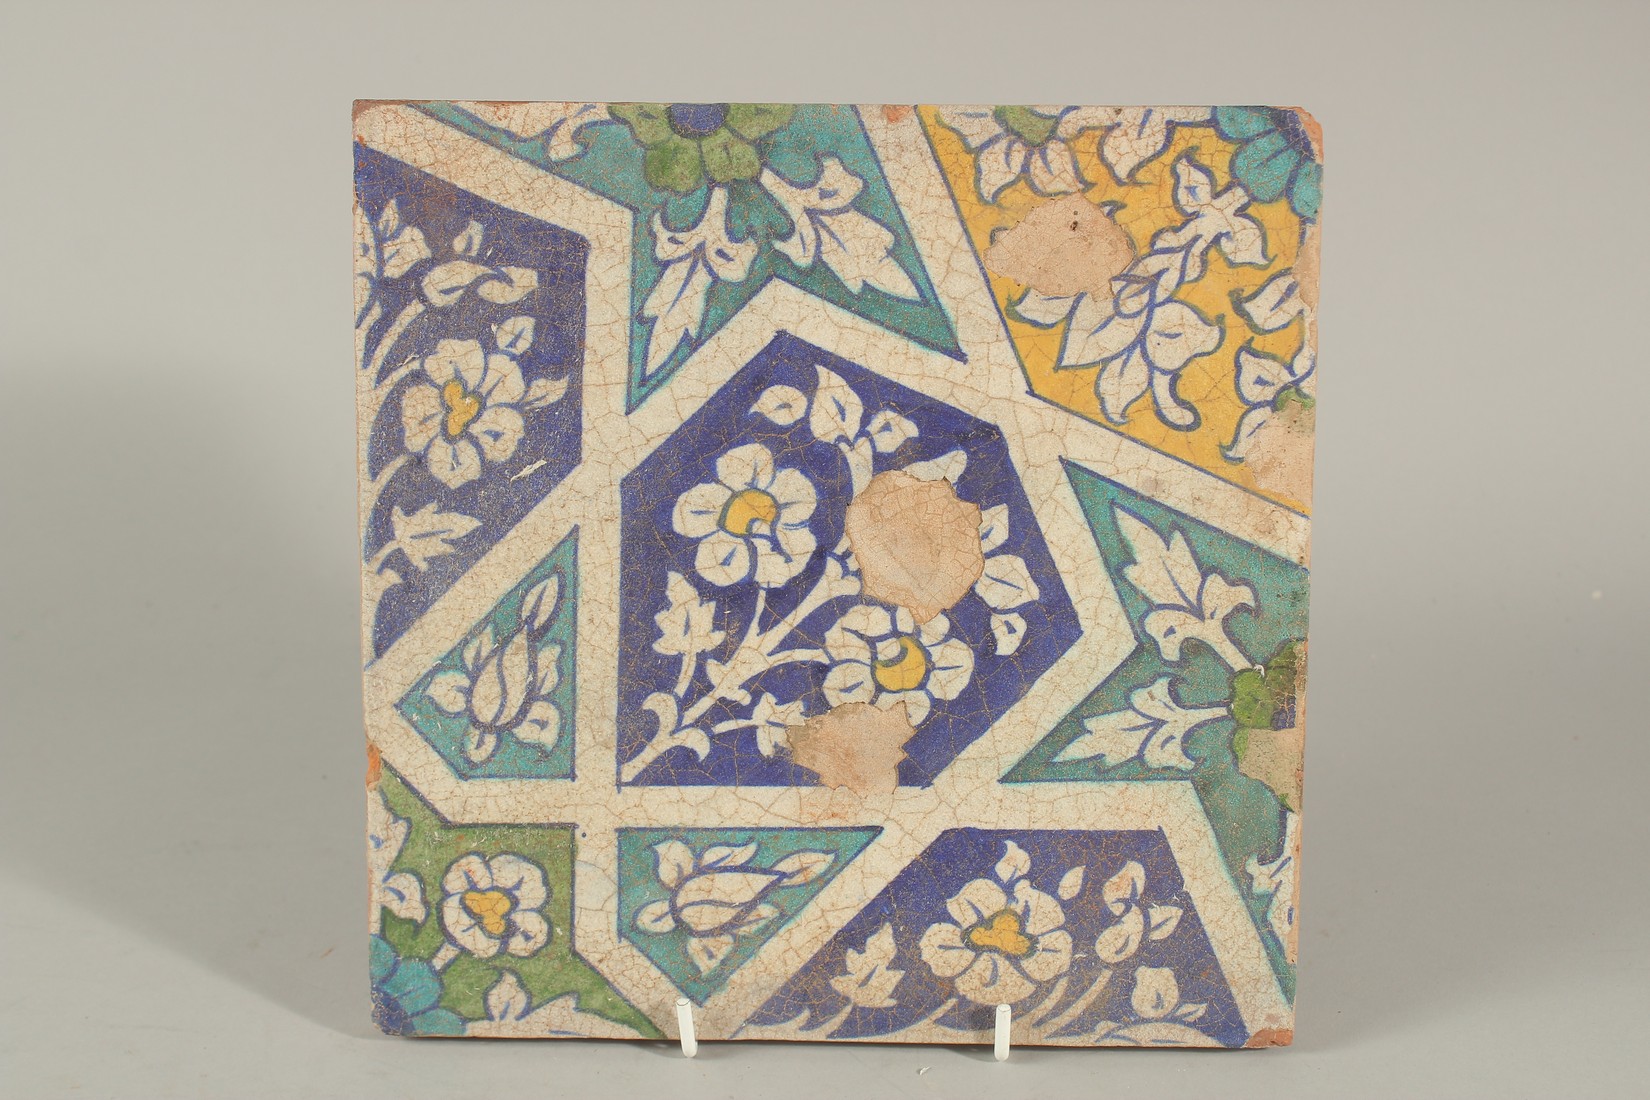 A FINE 18-19TH CENTURY MUGHAL INDIAN MULTAN POTTERY TILE WITH GEOMETRIC DESIGNS, 23cm square.